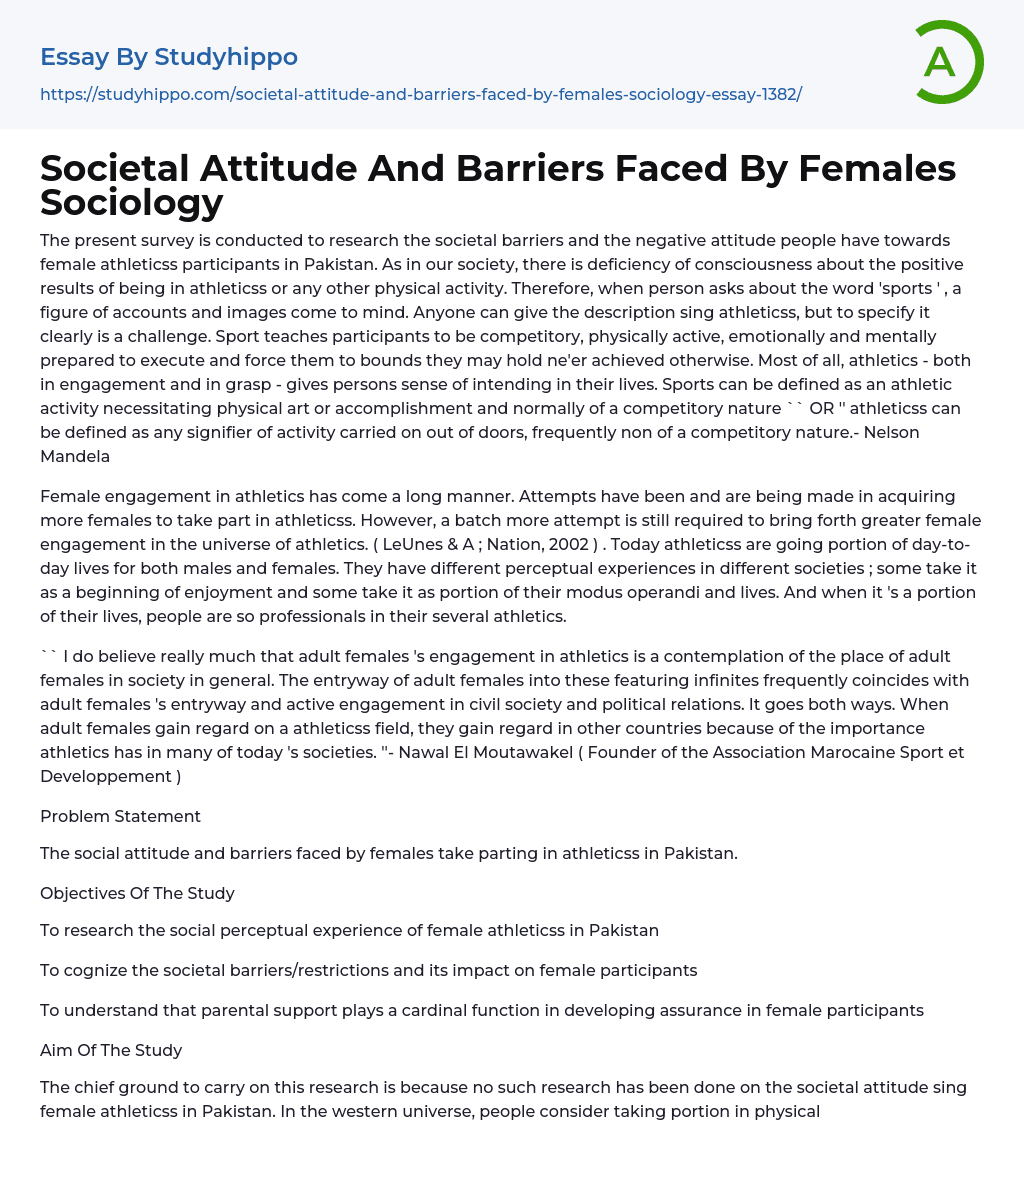 Societal Attitude And Barriers Faced By Females Sociology Essay Example